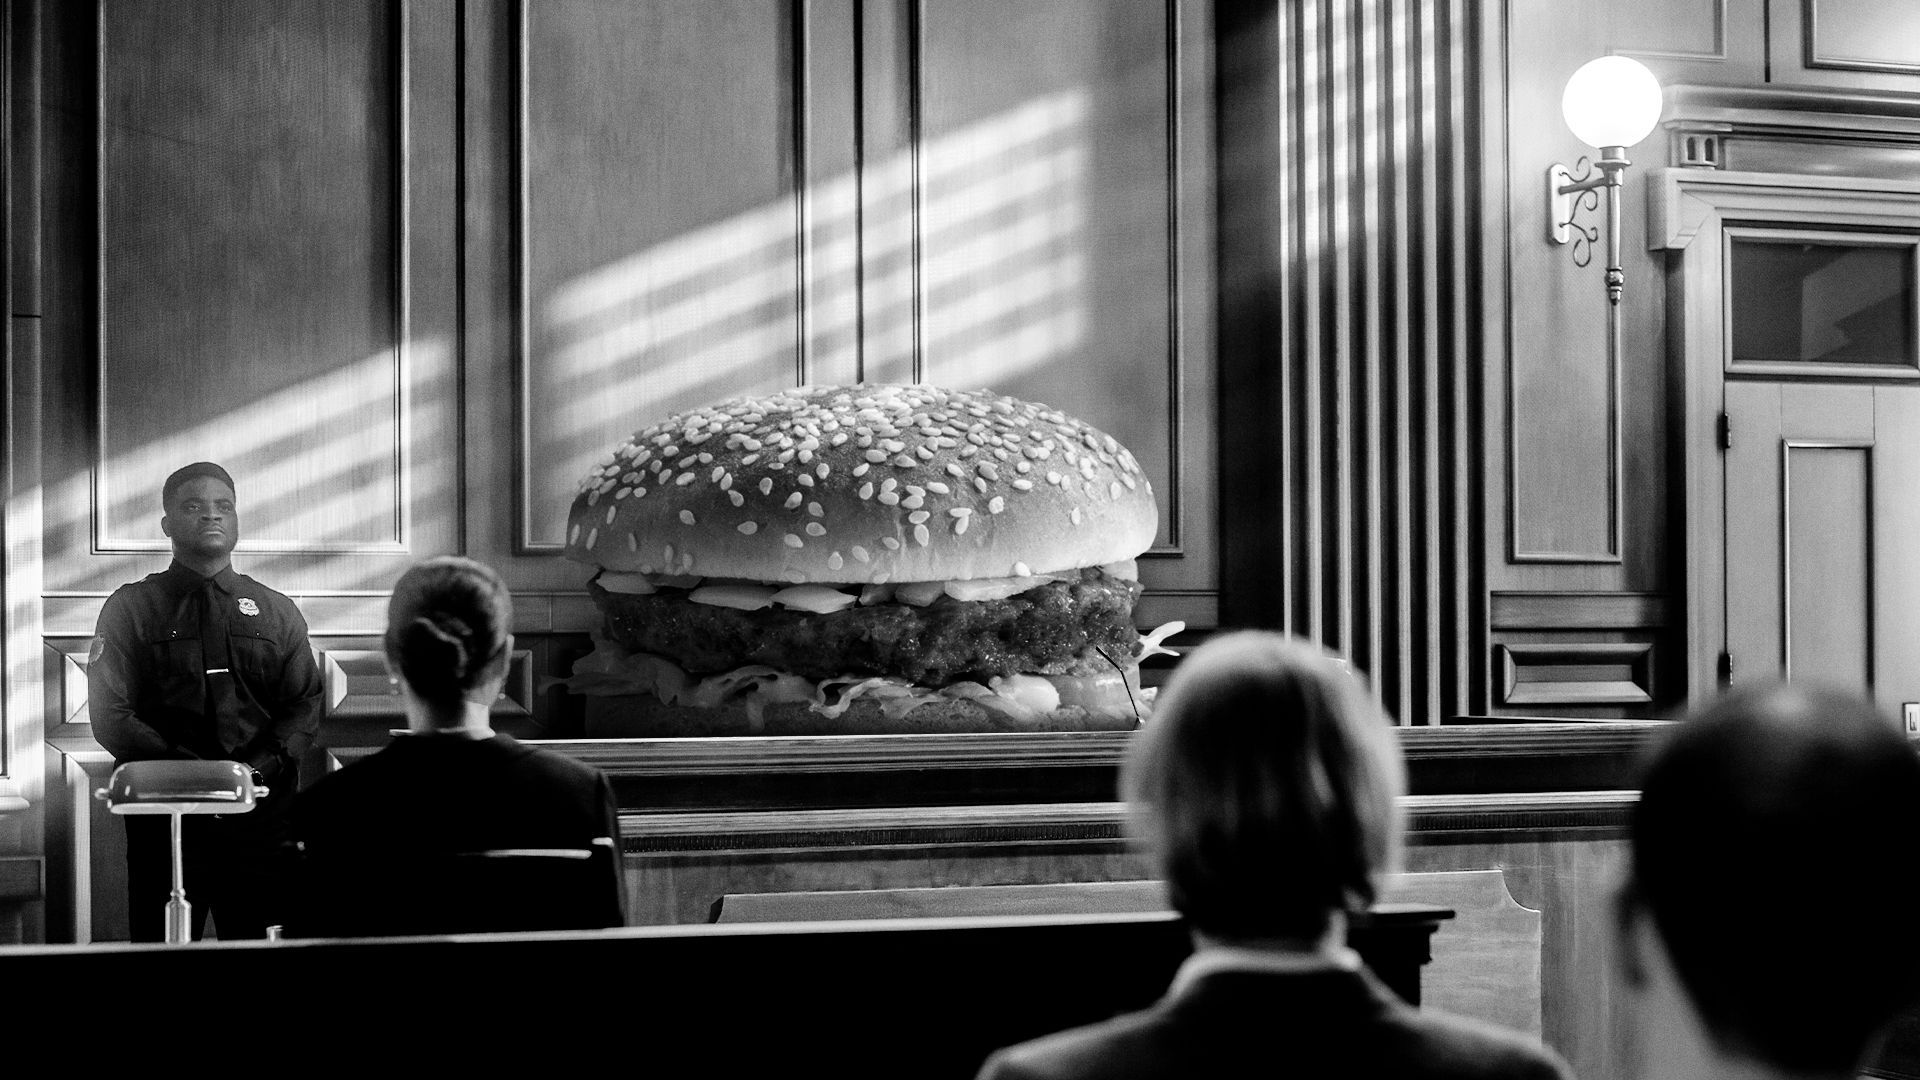 Illustration of a cheeseburger testifying in court